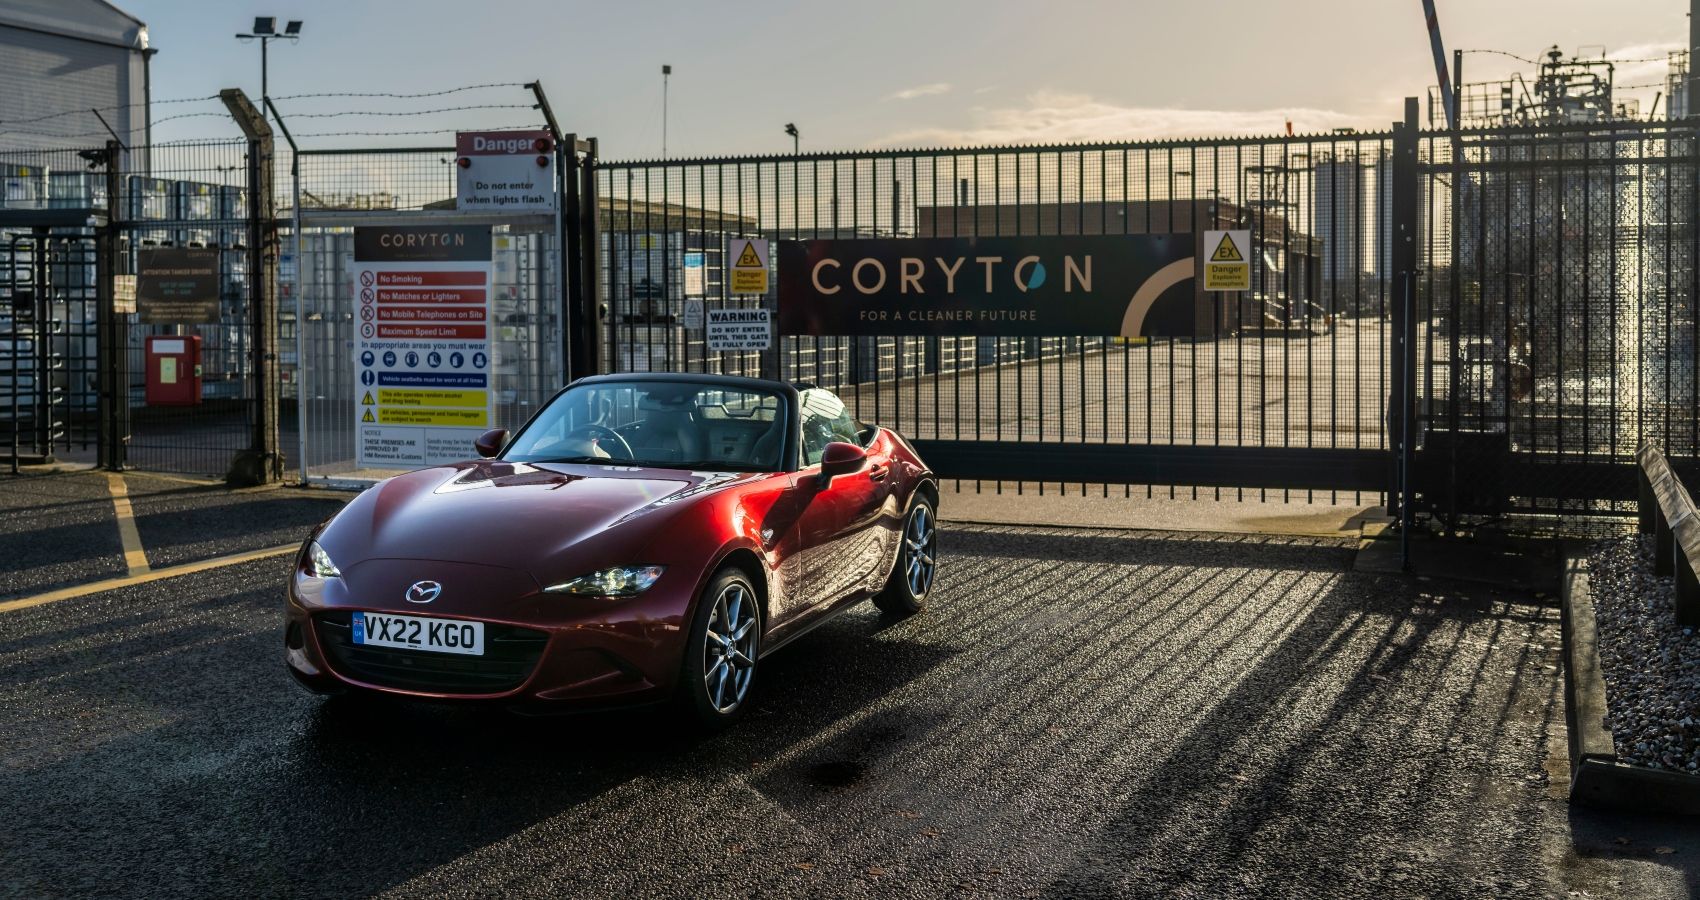 Mazda MX-5 Roadster collaborates with Coryton for achieving 1,000 mile drive on biofuel